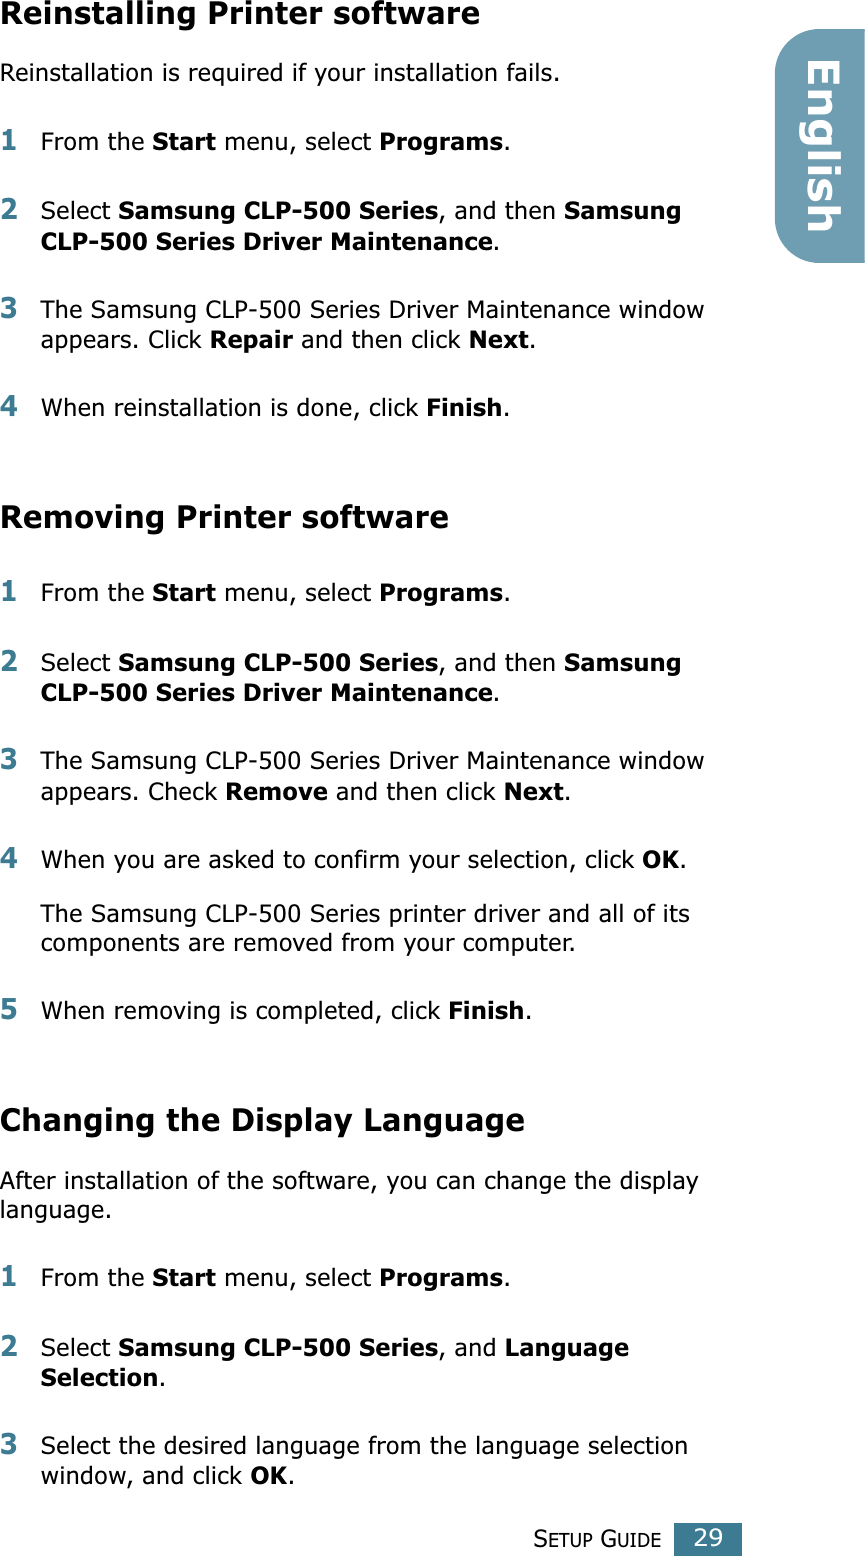 SETUP GUIDE29EnglishReinstalling Printer softwareReinstallation is required if your installation fails.1From the Start menu, select Programs.2Select Samsung CLP-500 Series, and then Samsung CLP-500 Series Driver Maintenance.3The Samsung CLP-500 Series Driver Maintenance window appears. Click Repair and then click Next. 4When reinstallation is done, click Finish. Removing Printer software1From the Start menu, select Programs.2Select Samsung CLP-500 Series, and then Samsung CLP-500 Series Driver Maintenance. 3The Samsung CLP-500 Series Driver Maintenance window appears. Check Remove and then click Next. 4When you are asked to confirm your selection, click OK. The Samsung CLP-500 Series printer driver and all of its components are removed from your computer. 5When removing is completed, click Finish. Changing the Display LanguageAfter installation of the software, you can change the display language. 1From the Start menu, select Programs.2Select Samsung CLP-500 Series, and Language Selection.3Select the desired language from the language selection window, and click OK. 